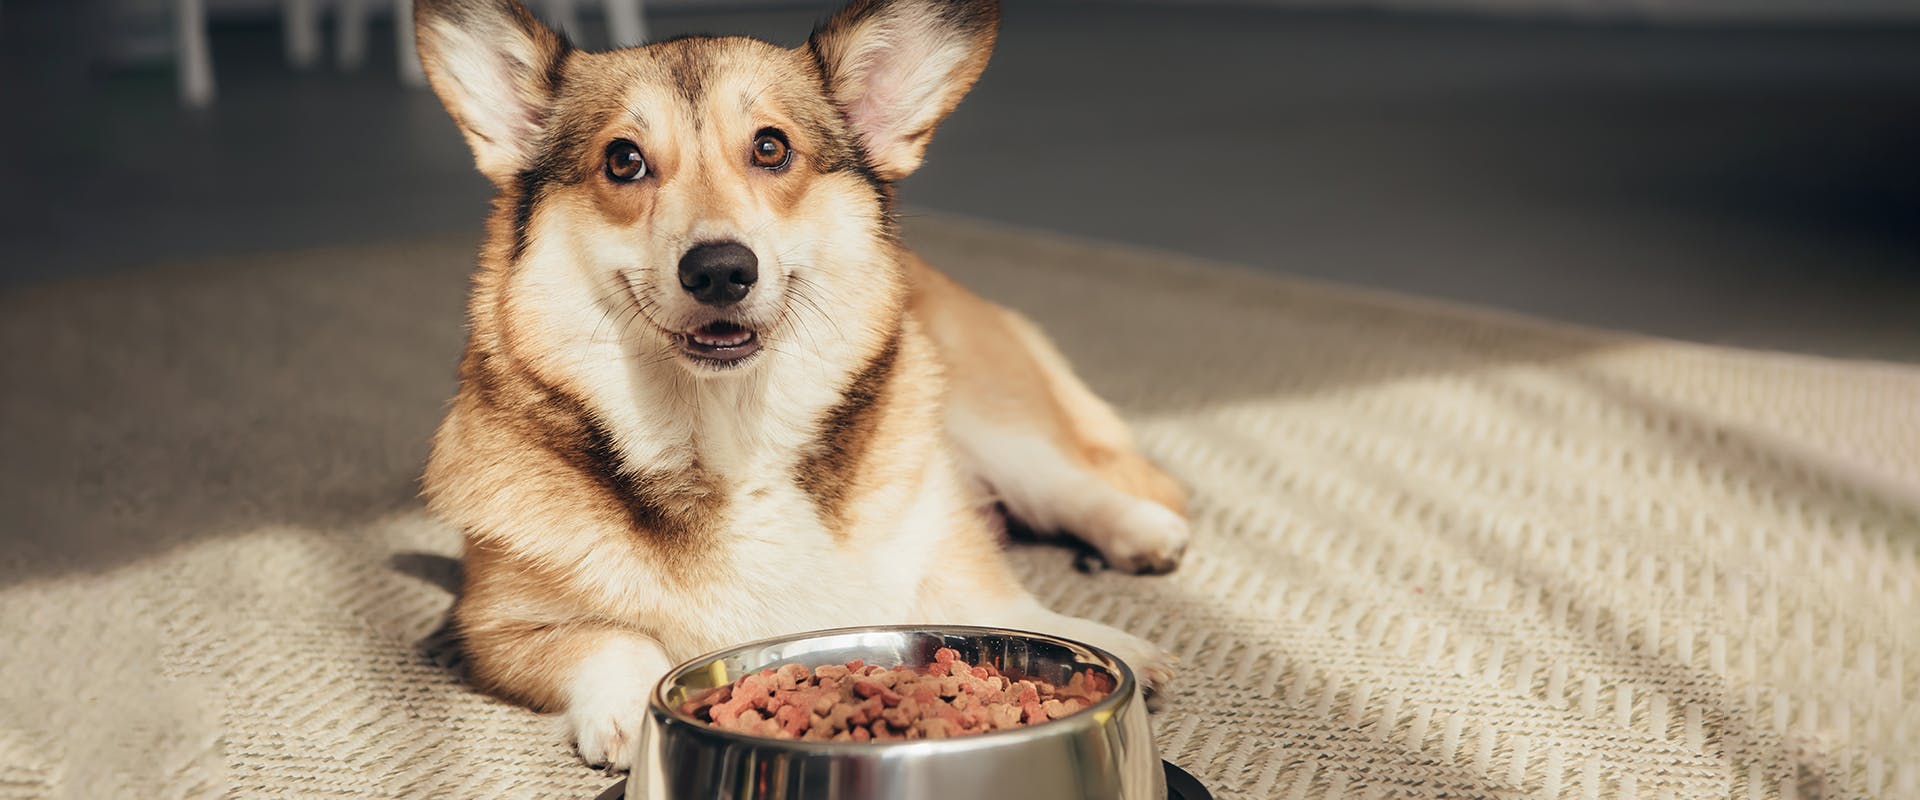 A Corgi dog sitting on the floor, a bowl of organic dog food in front of it